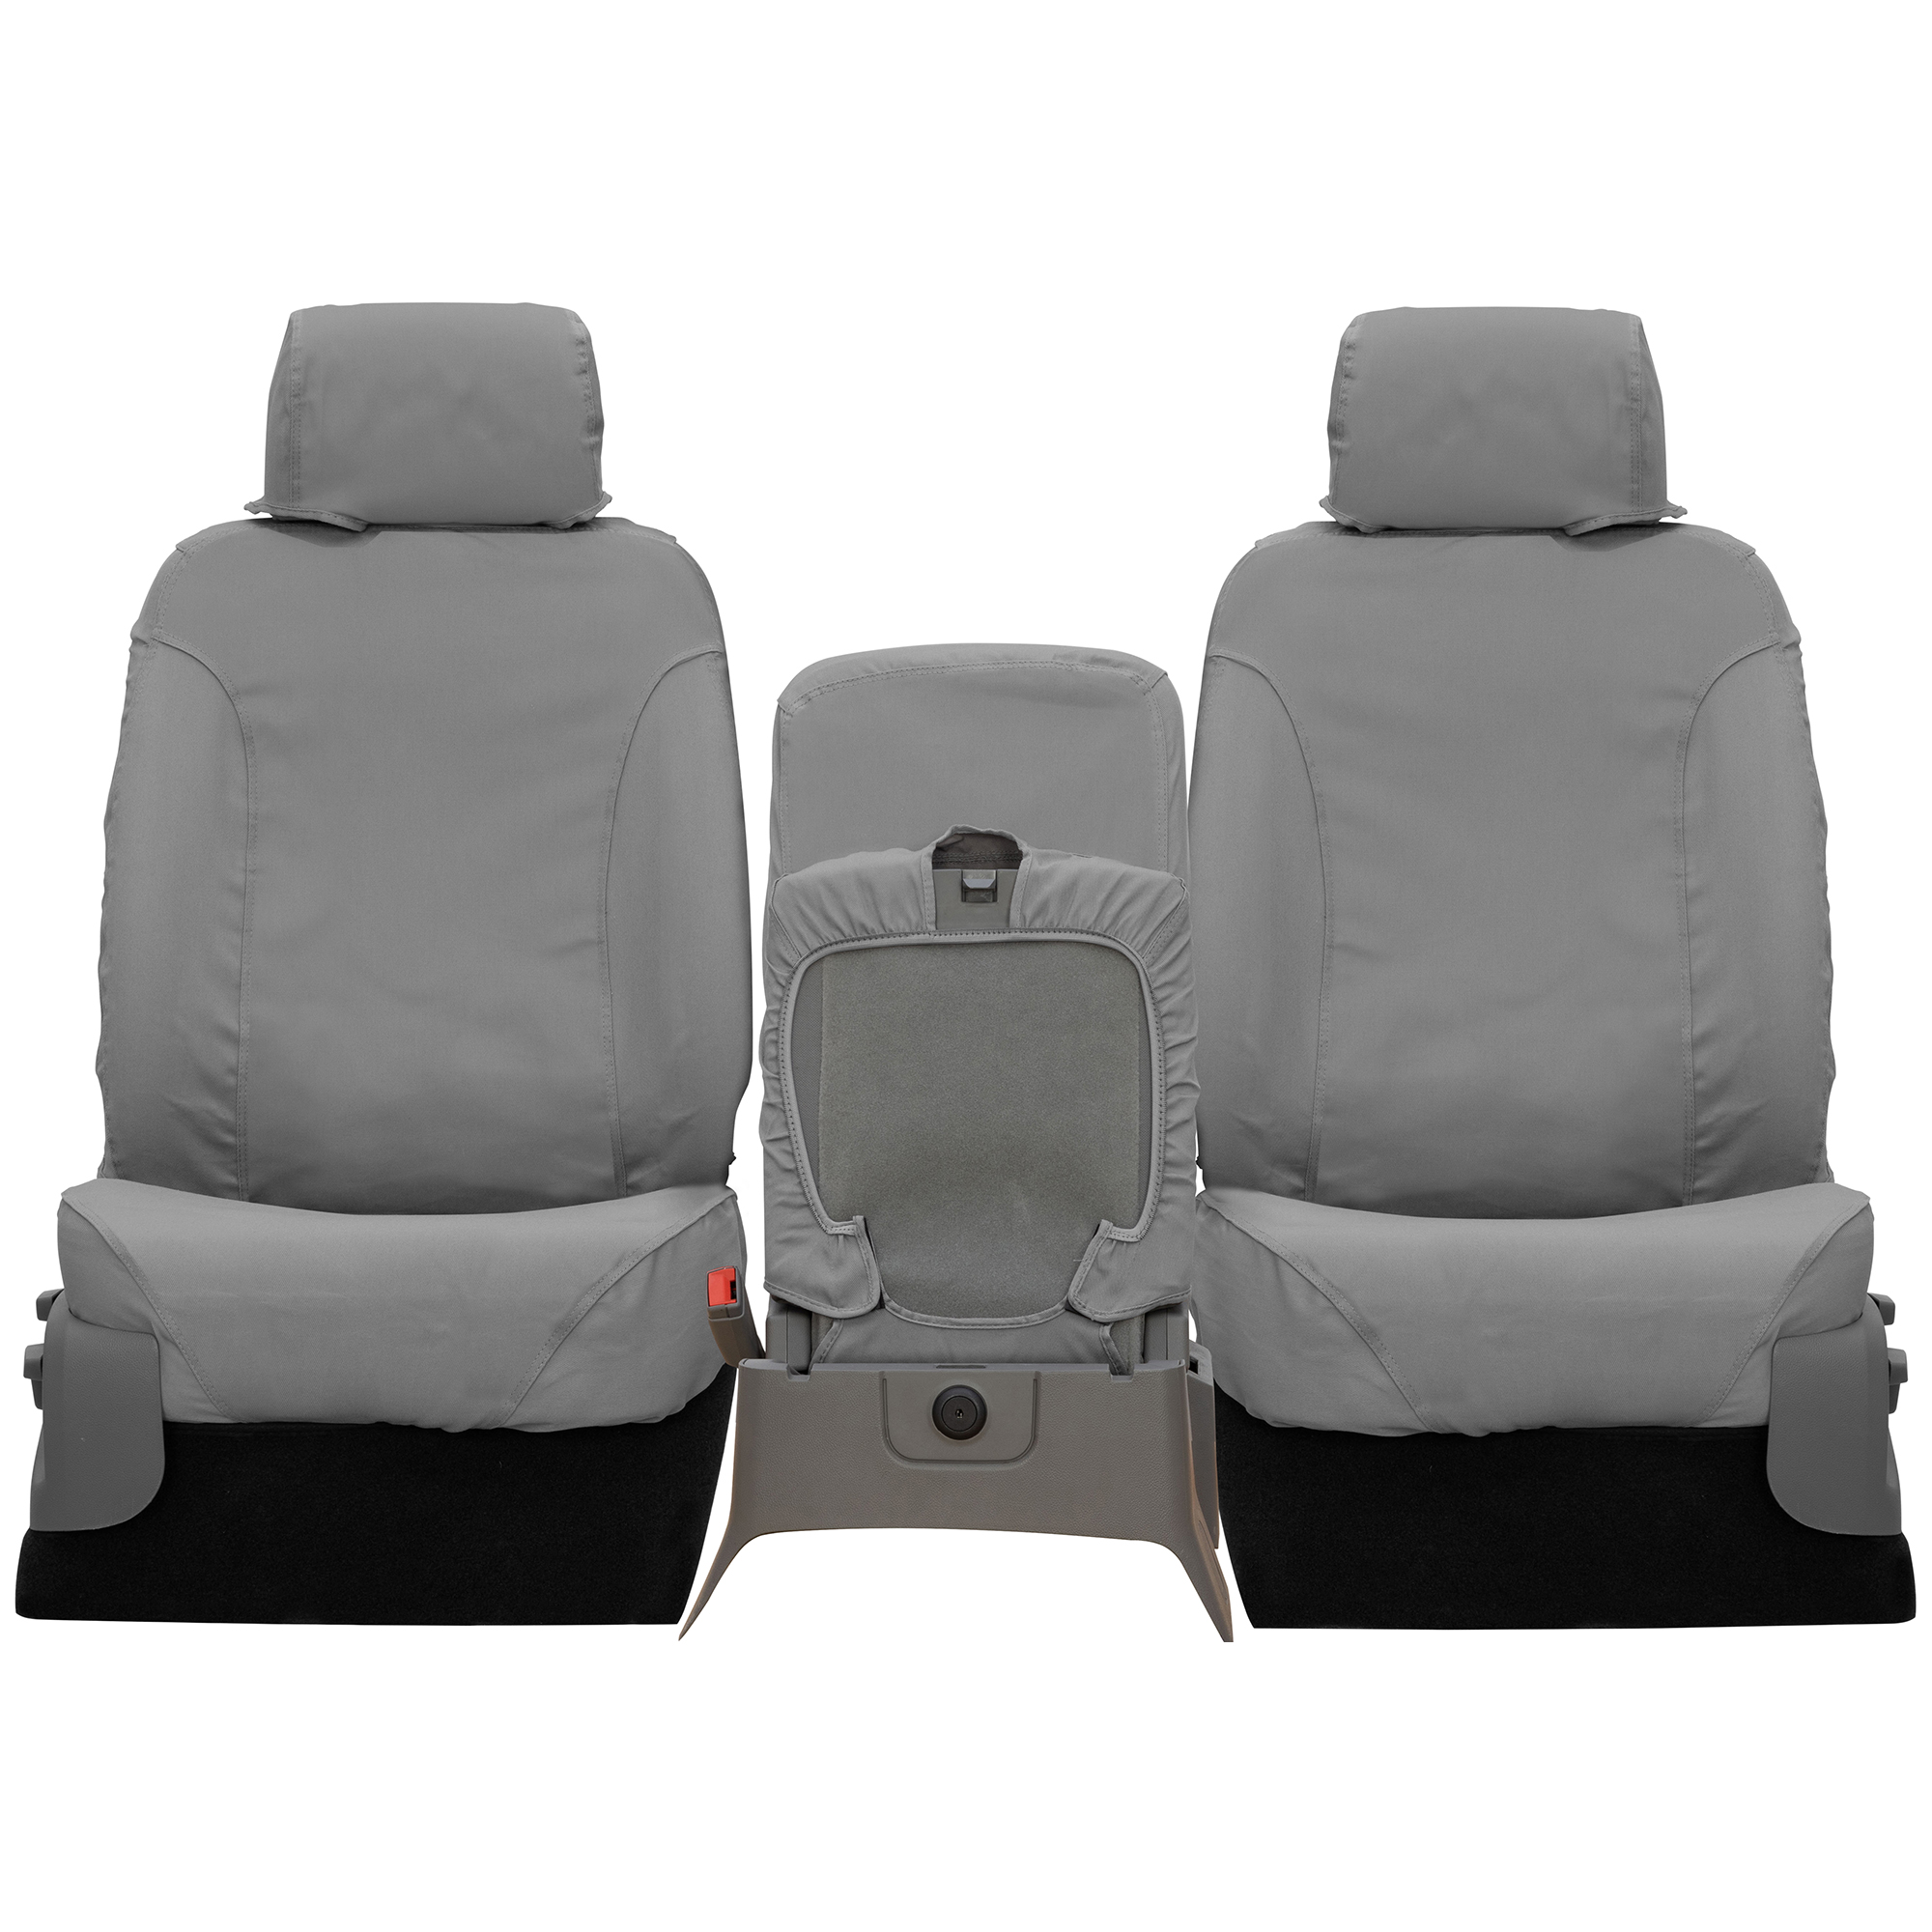 Covercraft SeatSaver Front Row Custom Fit Seat Cover for Select Ram Pickup Models - Polycotton (Grey) - image 4 of 7